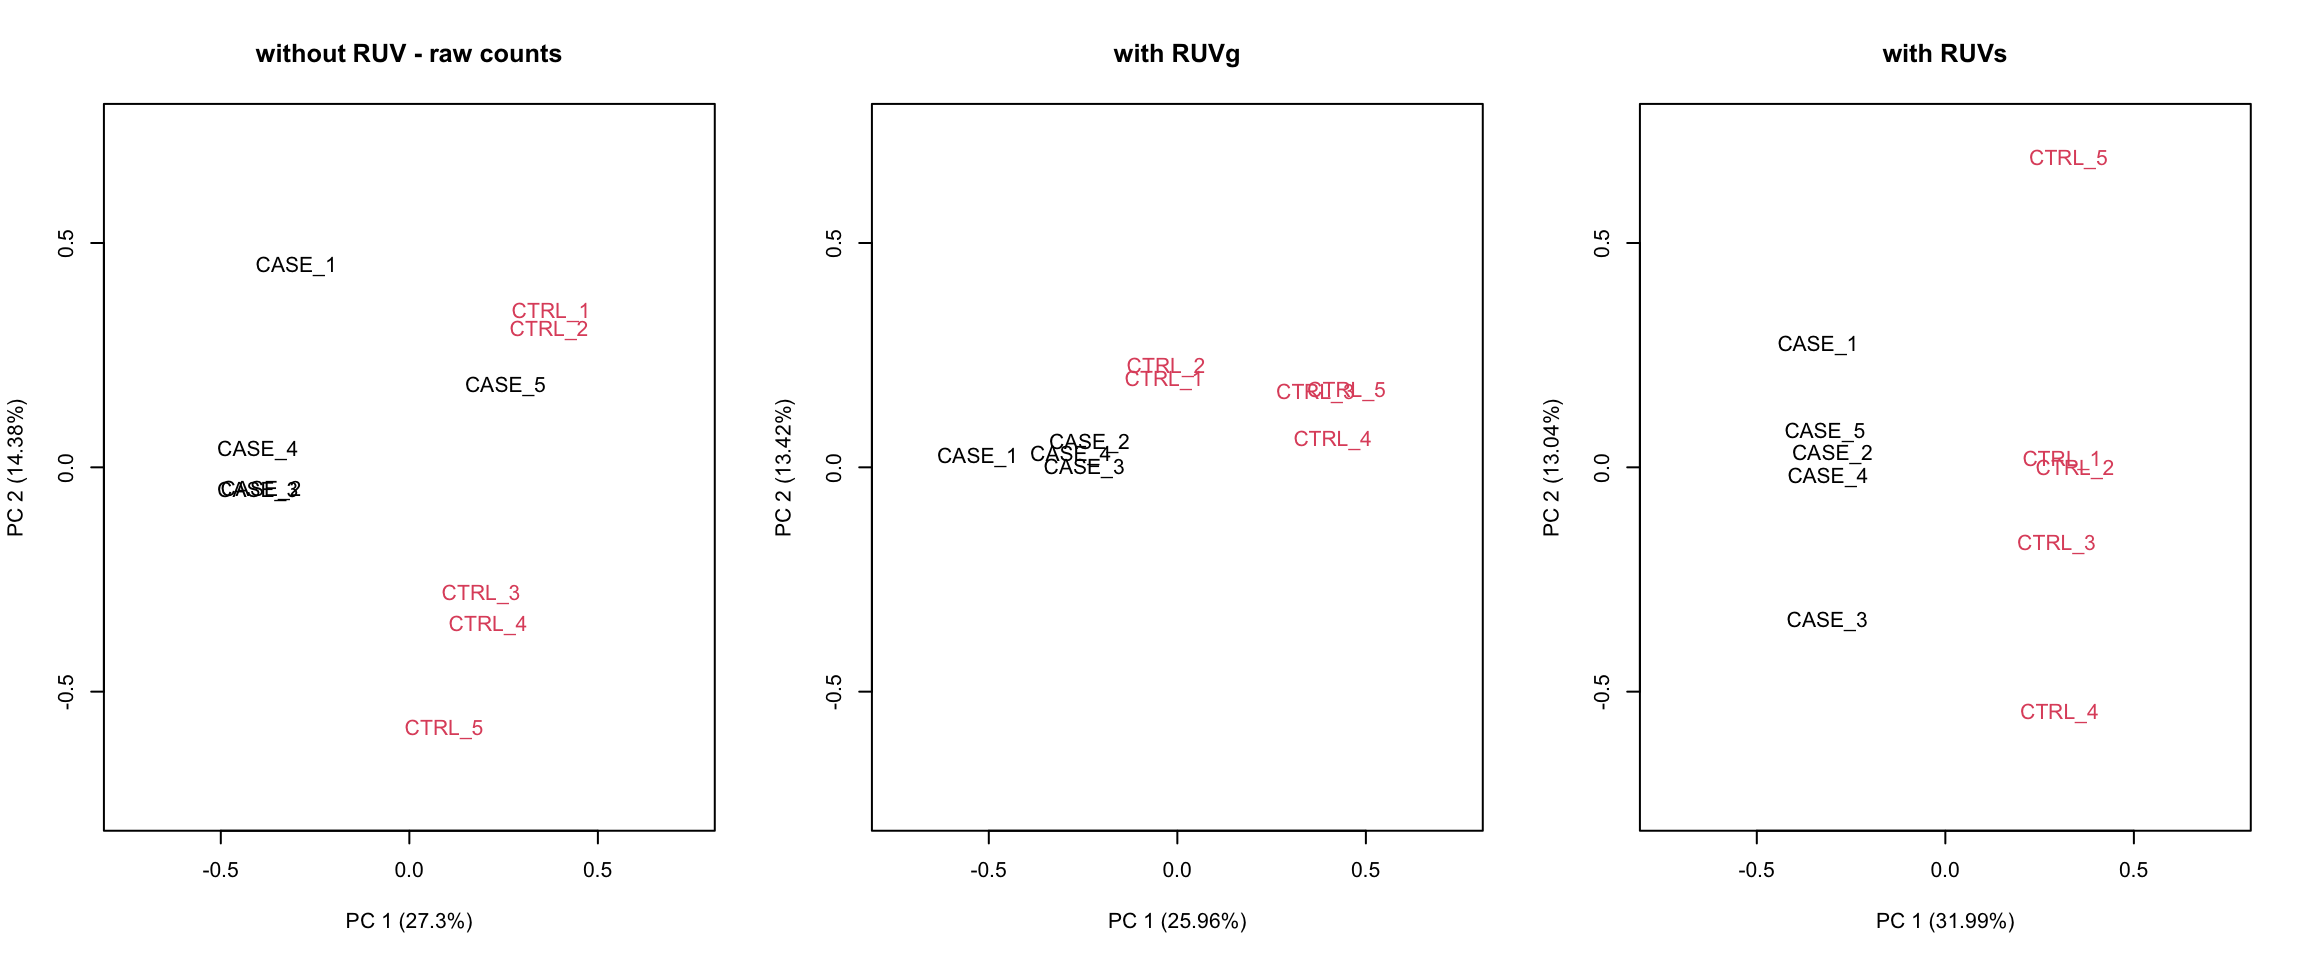 PCA plots to observe the before/after effect of RUV functions.